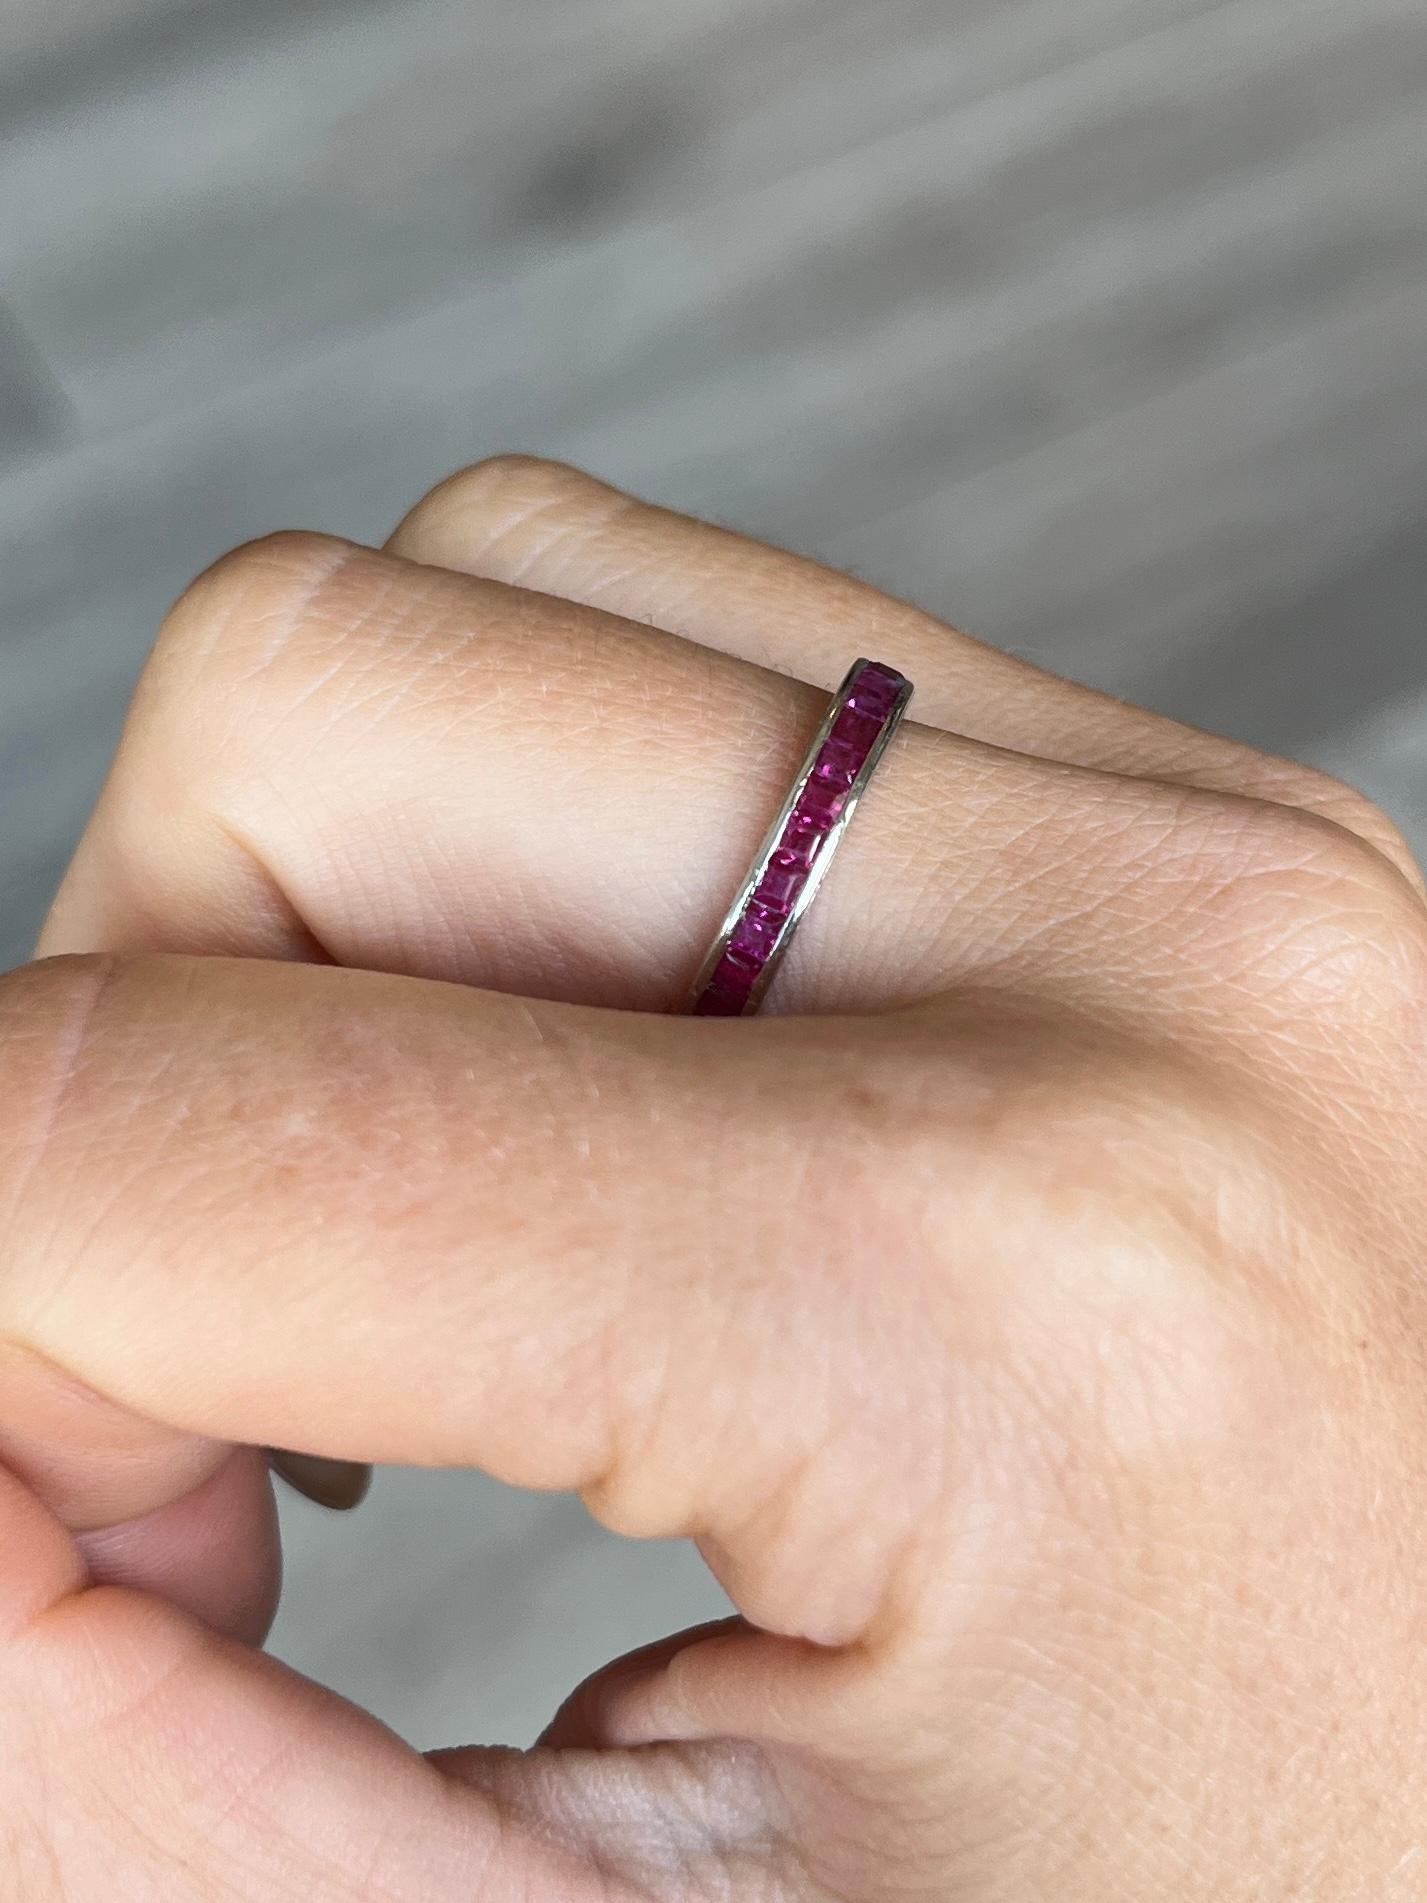 The rubies in this eternity band are a beautiful cherry pink colour and are set within the platinum band. The band has fine engraving on either side of it and the stones total approx 1.5ct. 

Ring Size: M or 6 1/4 
Band Width: 3.5mm 
Height off